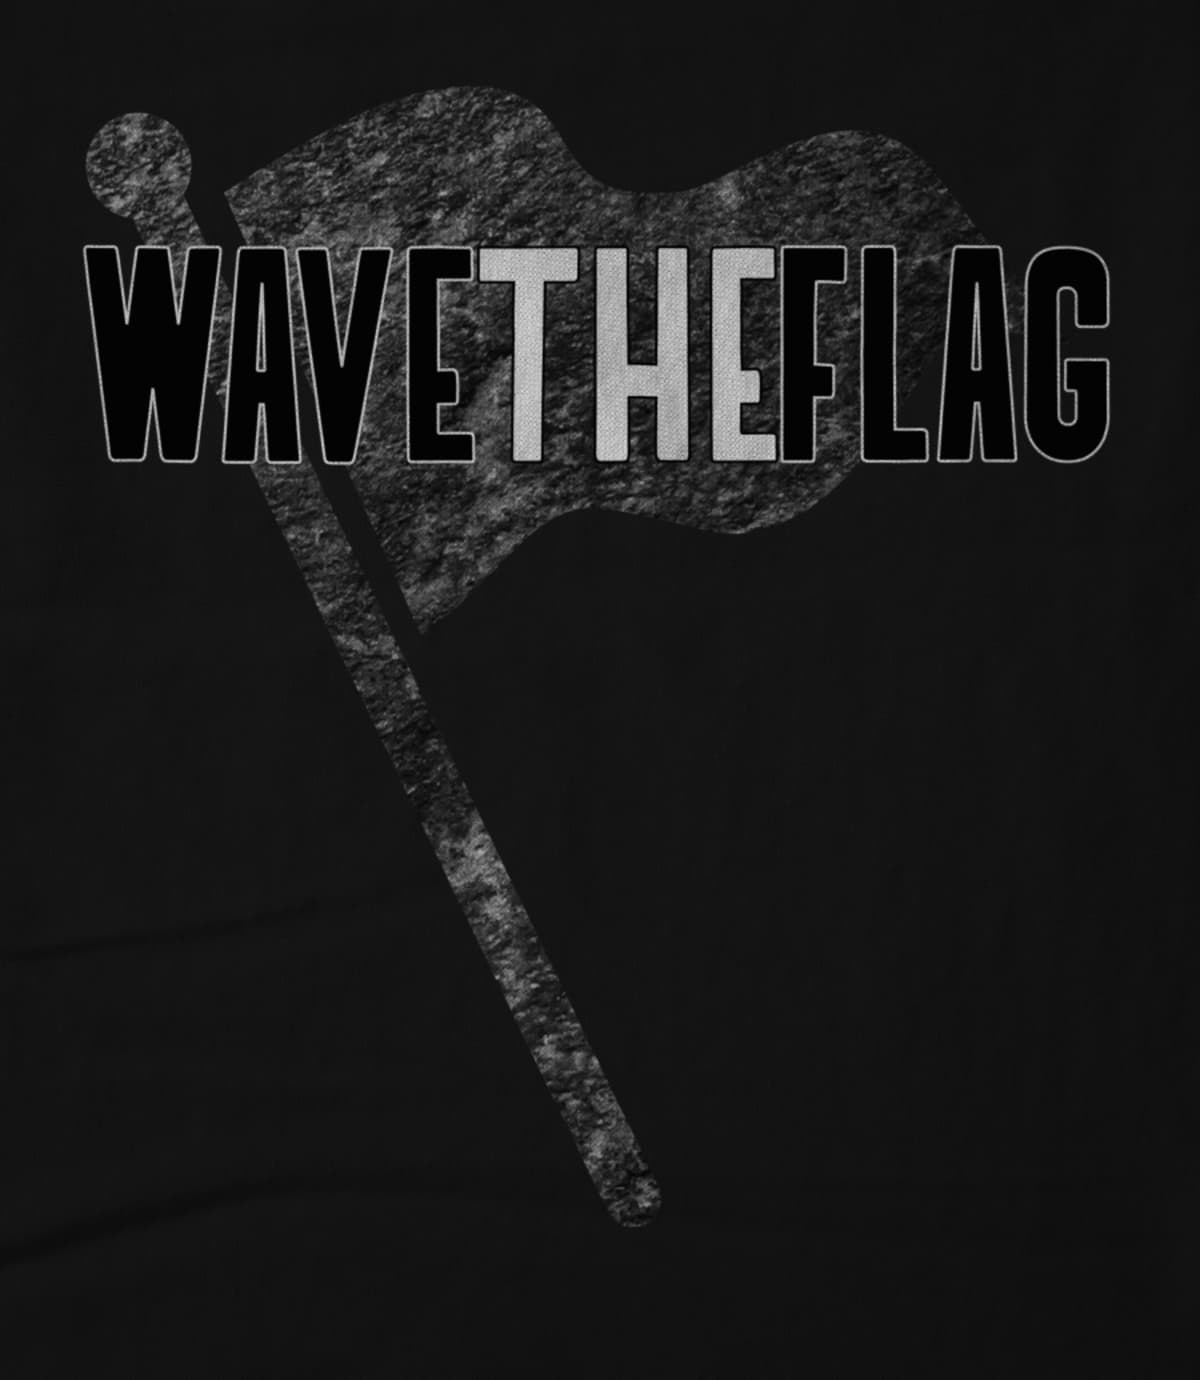 Wave the Flag